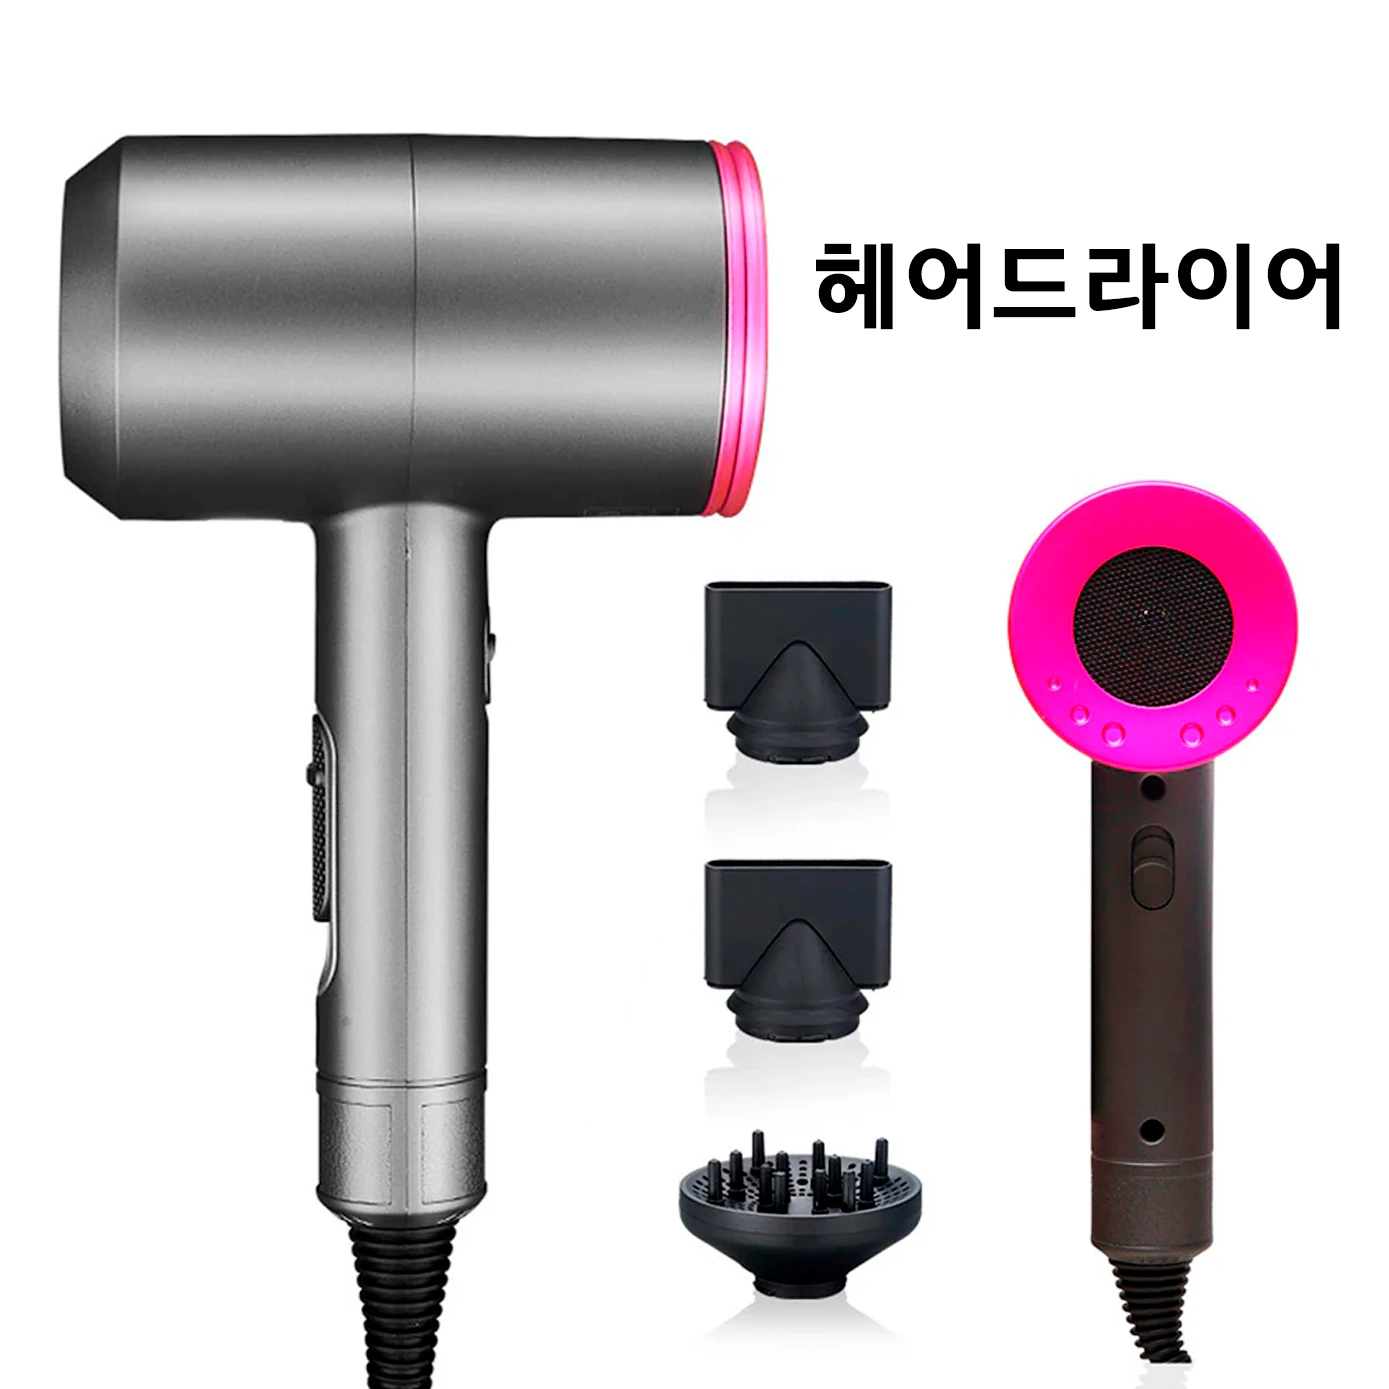 

Professional Salon Negative Ionic Hair Dryer Wind Powerful Hairdryer Homeuse Dryer Hot Cold Wind Blow Dryer Modeling Tool